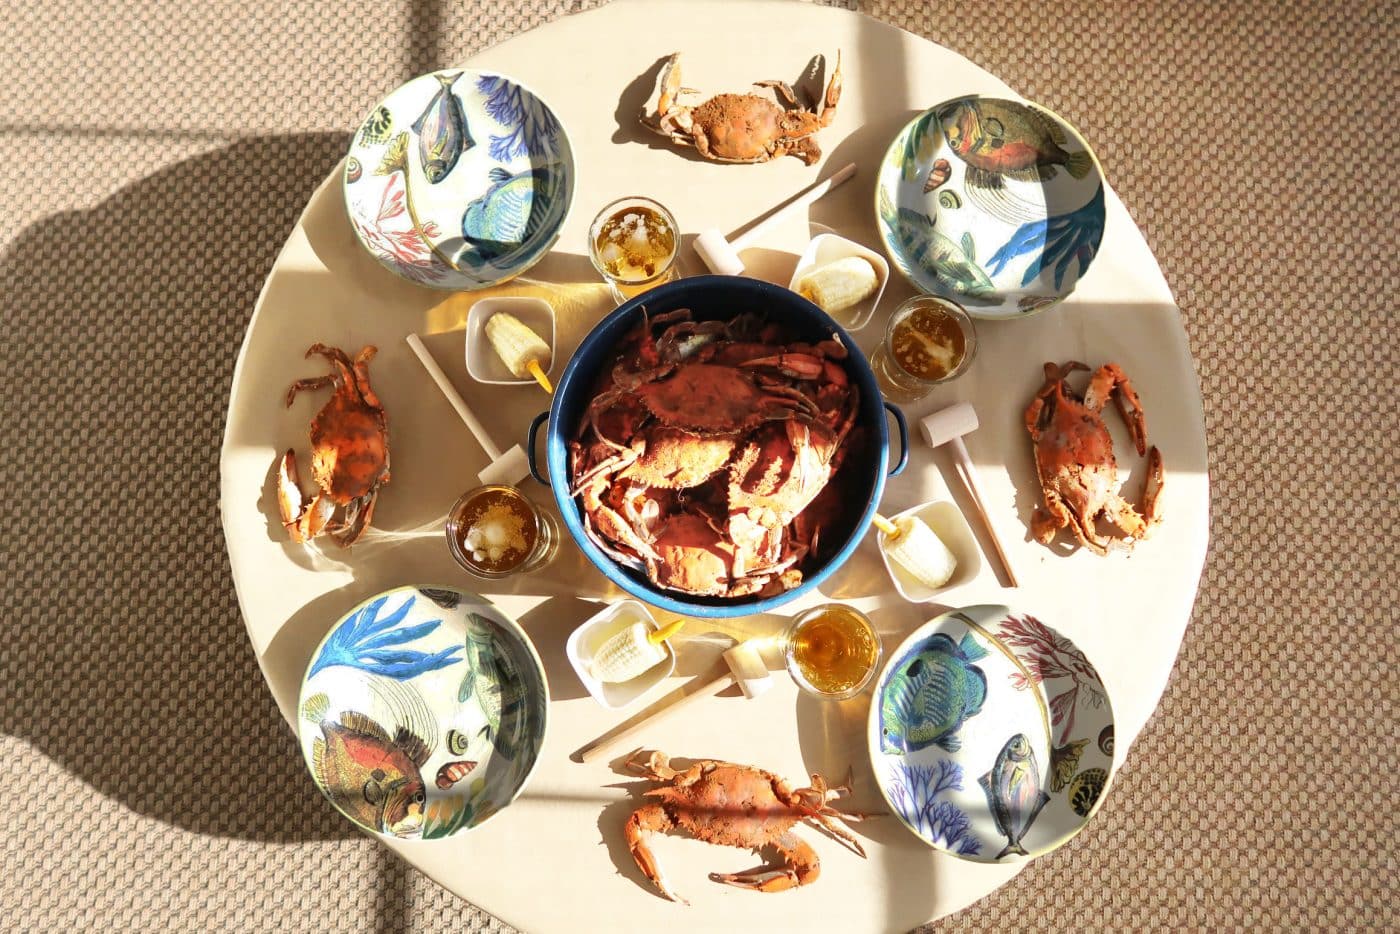 round table with maryland crab feast, blue pot, fish bowls, mallets, blue stock pot